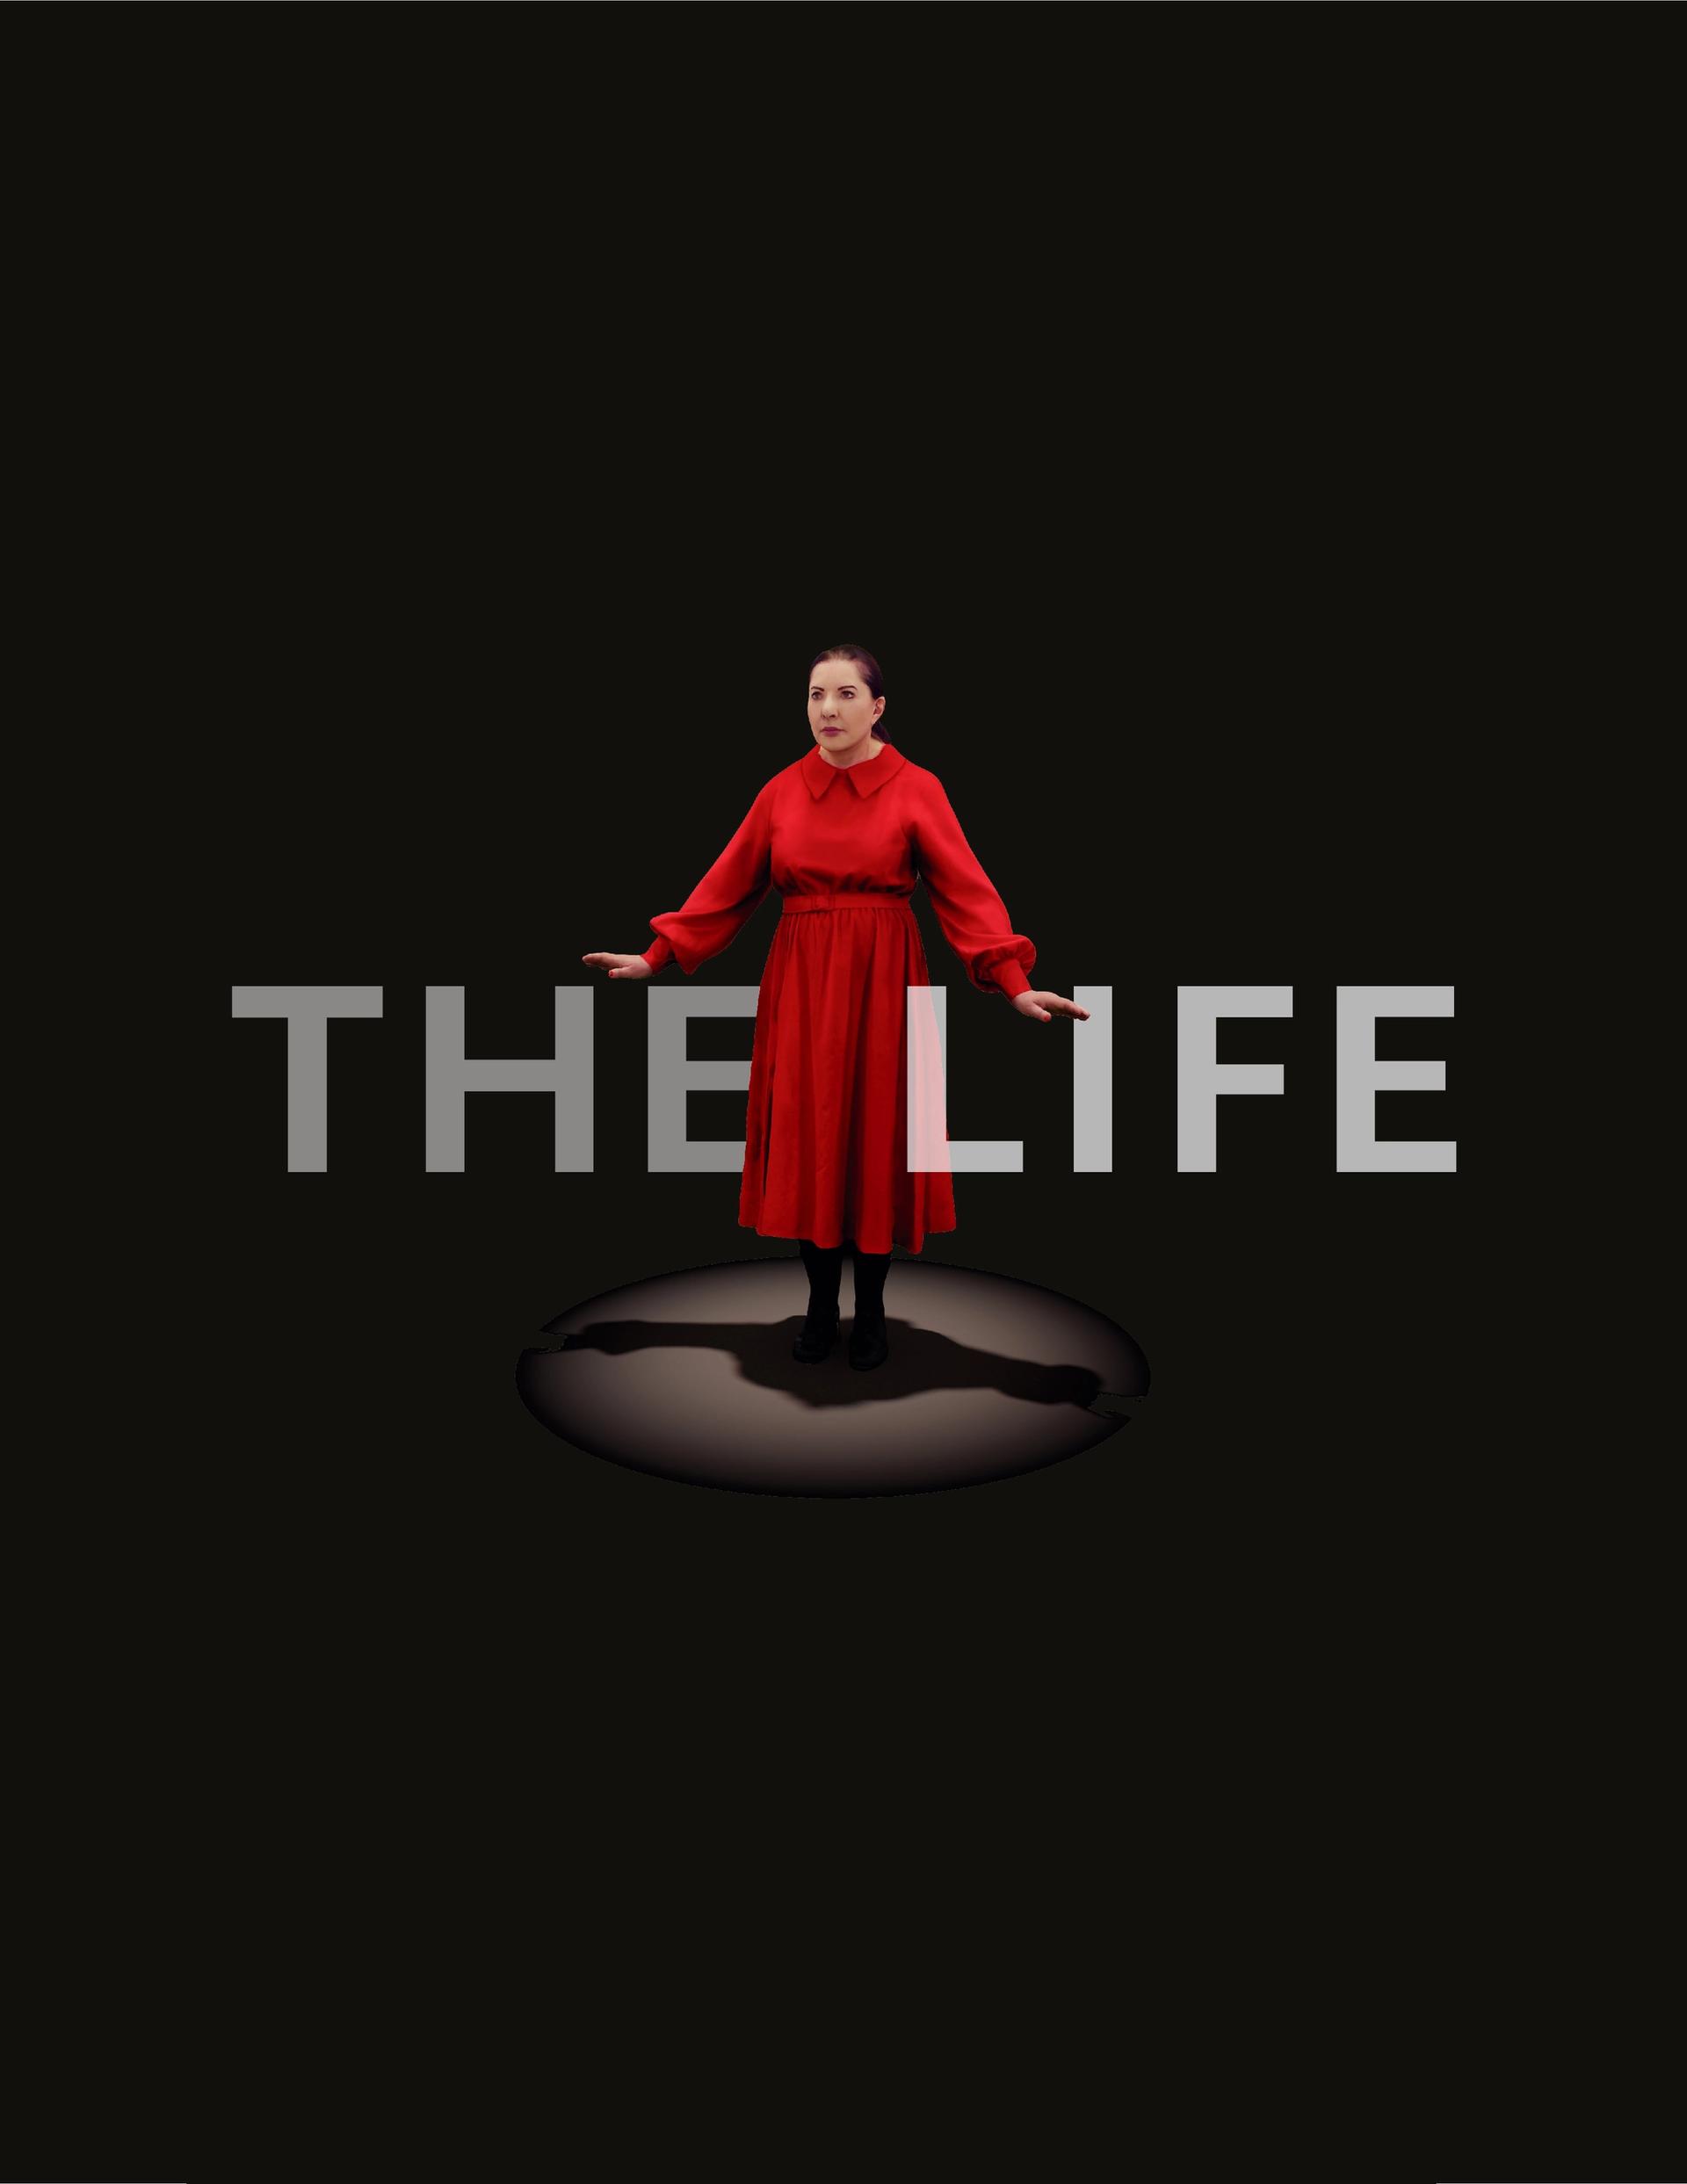 For one week, the Serpentine Galleries will host Mixed Reality performance The Life Image courtesy of Marina Abramović and Tin Drum